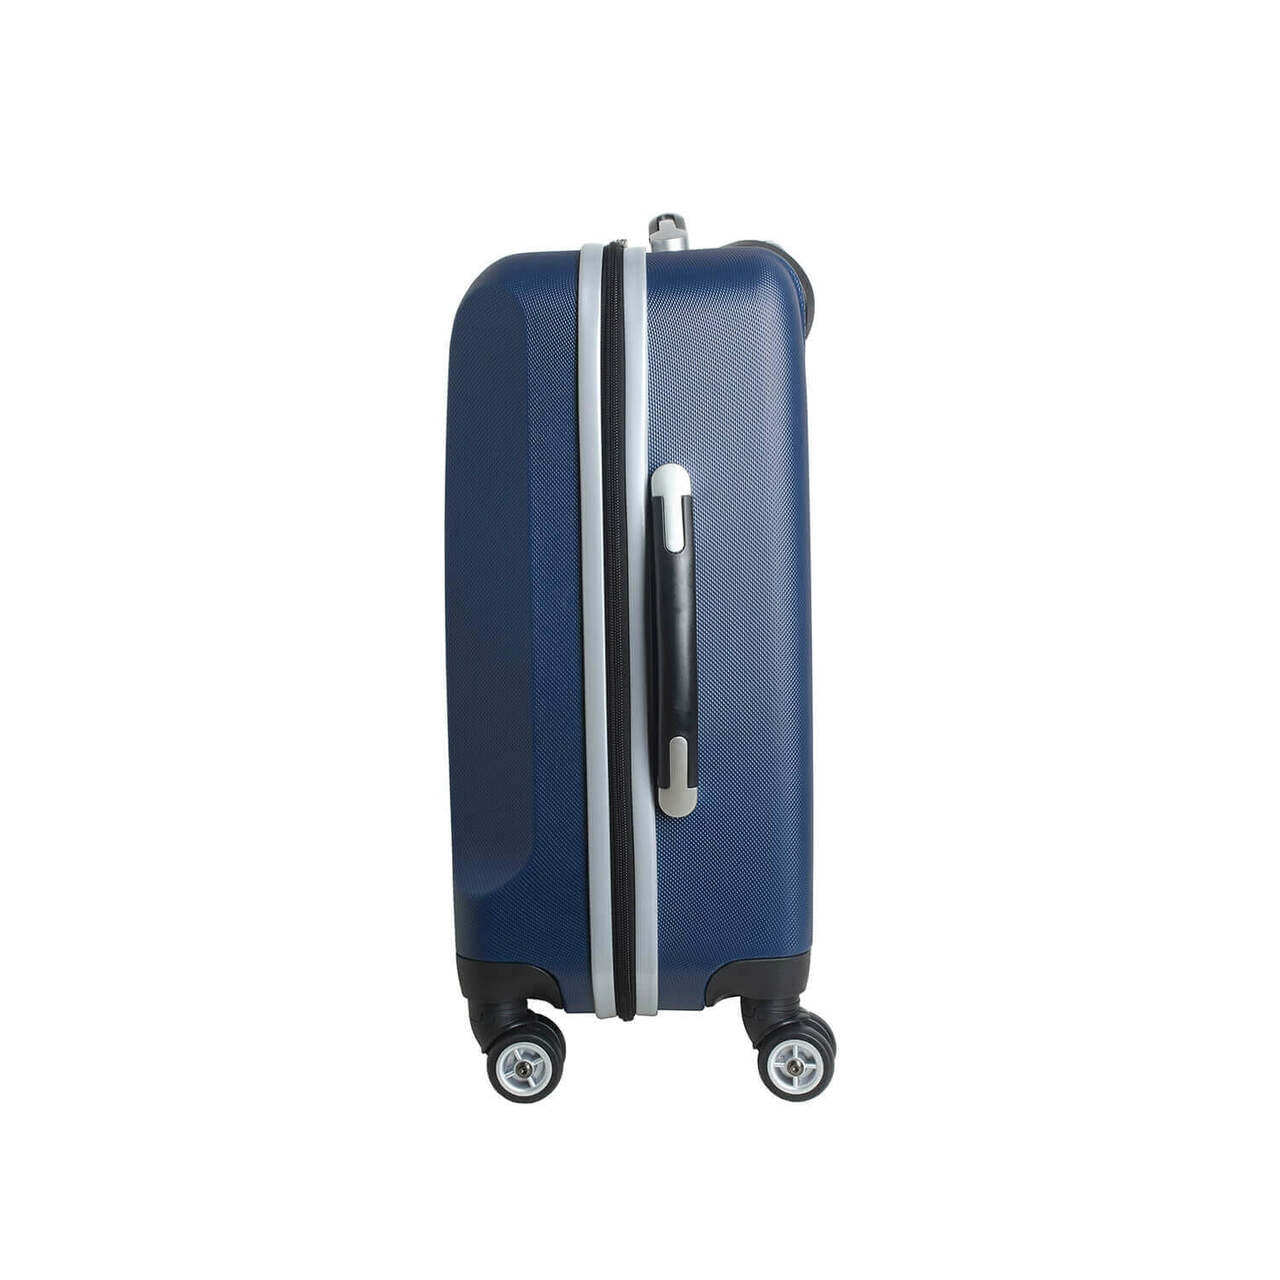 Personalized Initial Name letter "O" 20 inches Carry on Hardcase Spinner Luggage by Mojo in NAVY